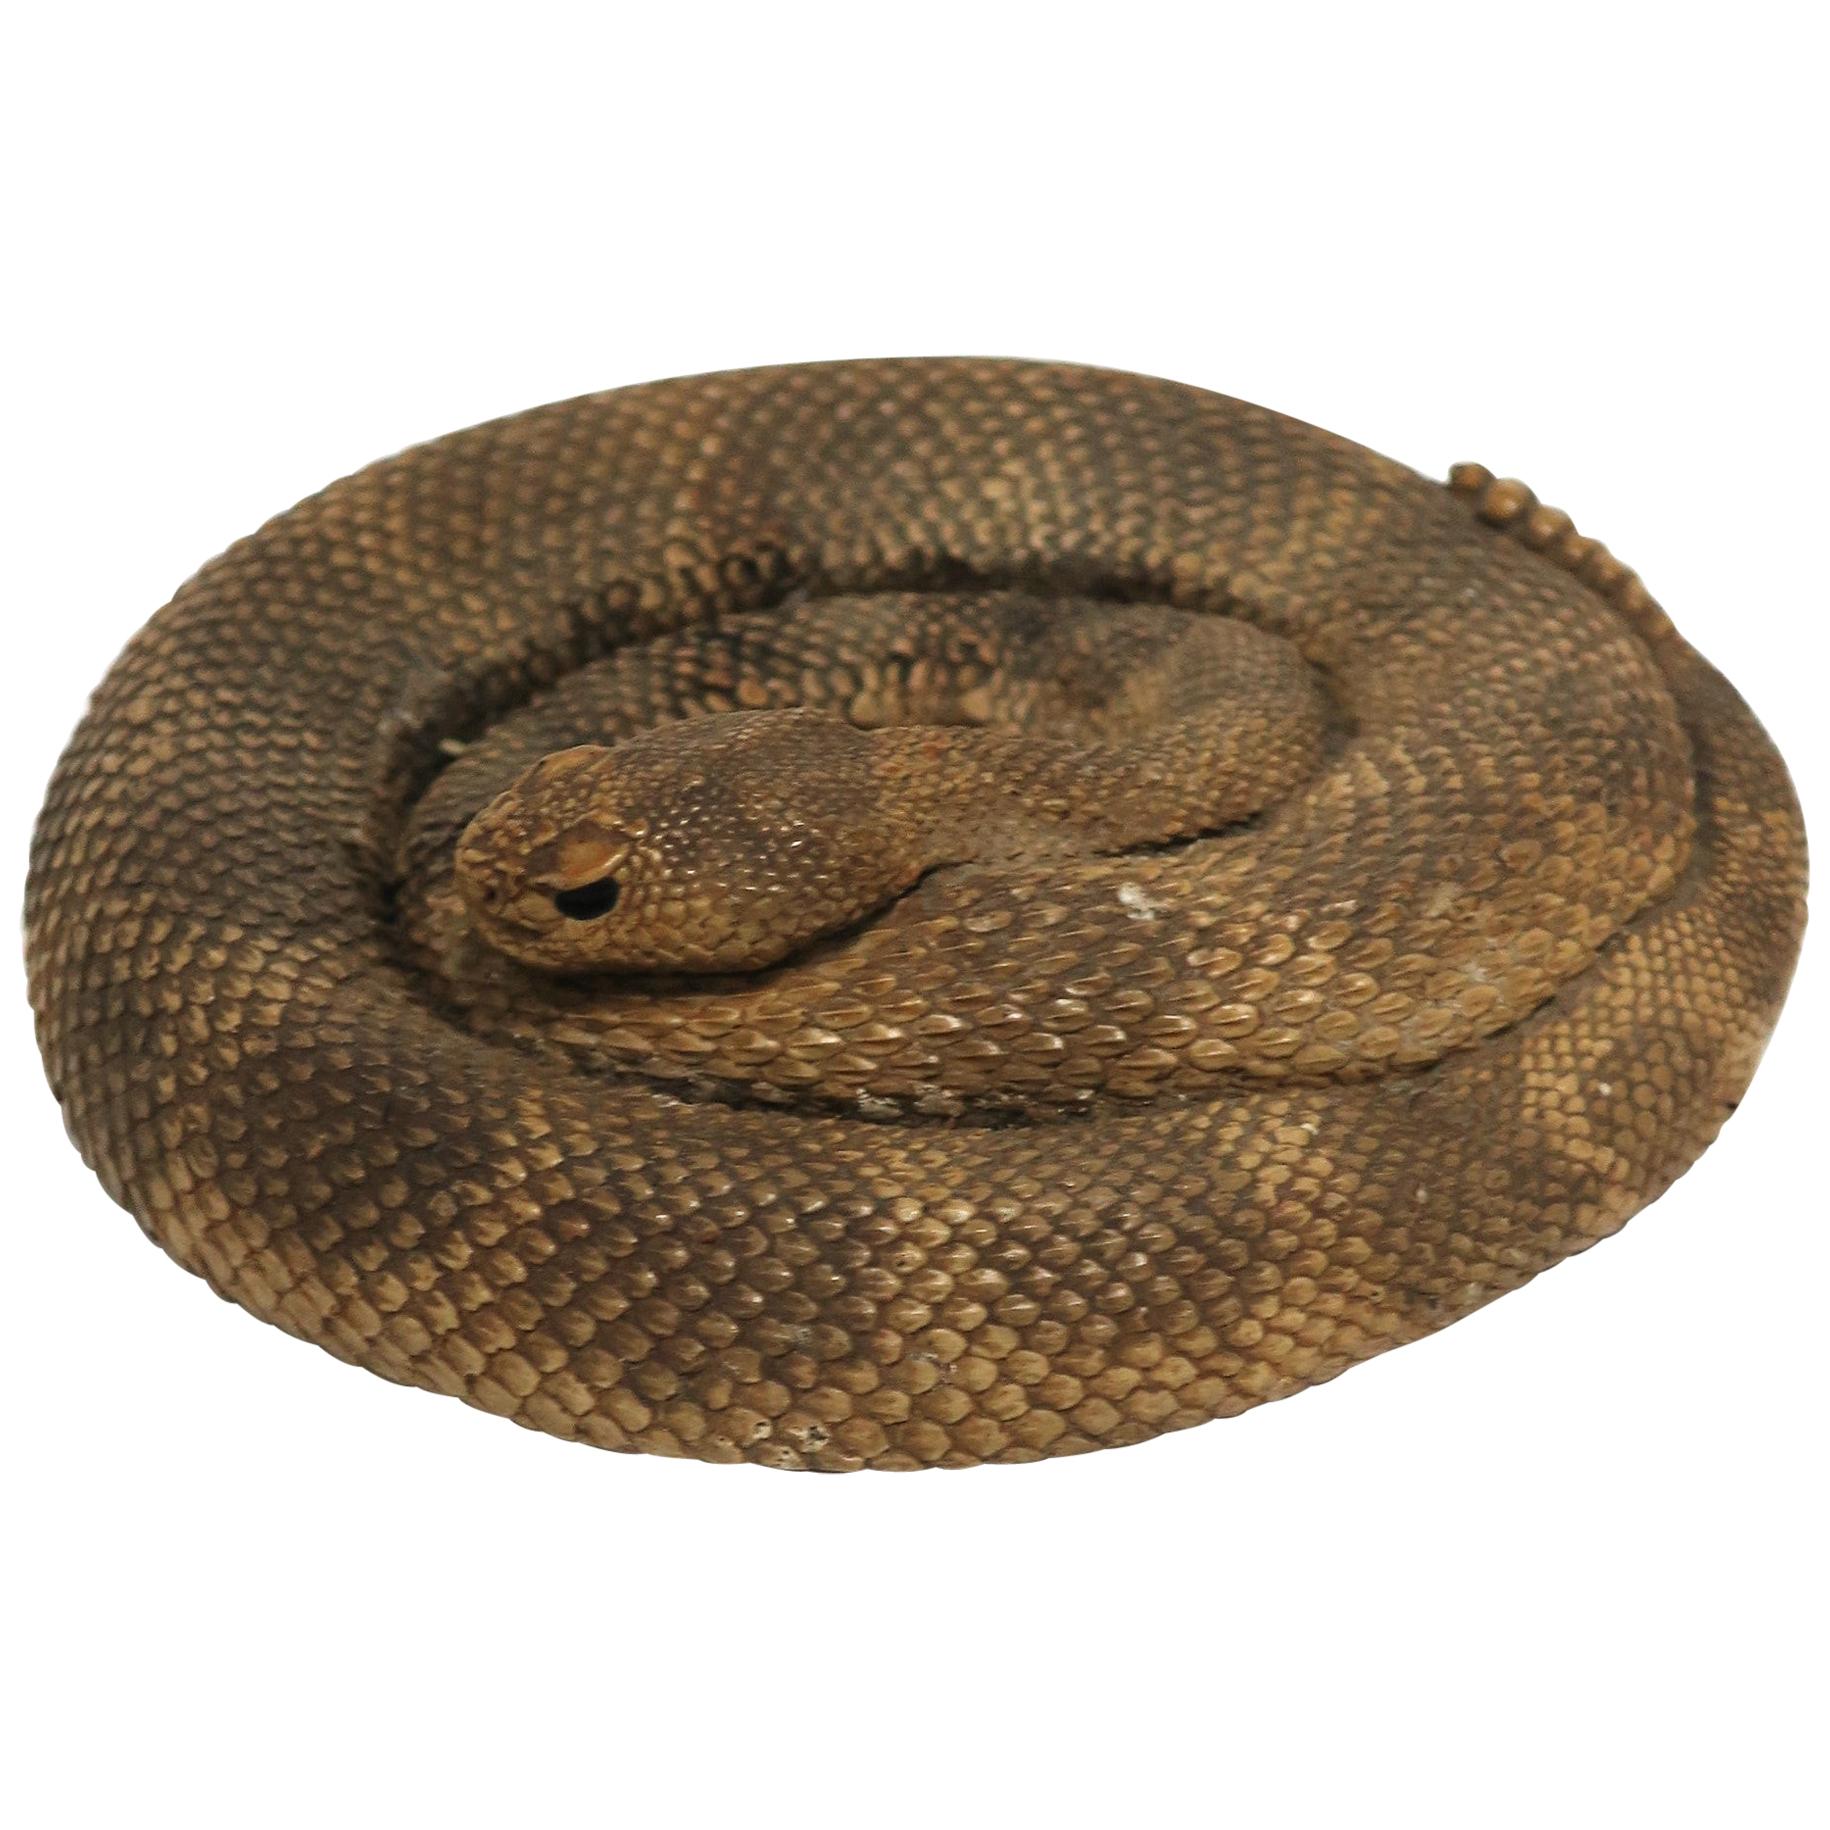 Coiled Rattle Snake, circa 1980s USA For Sale